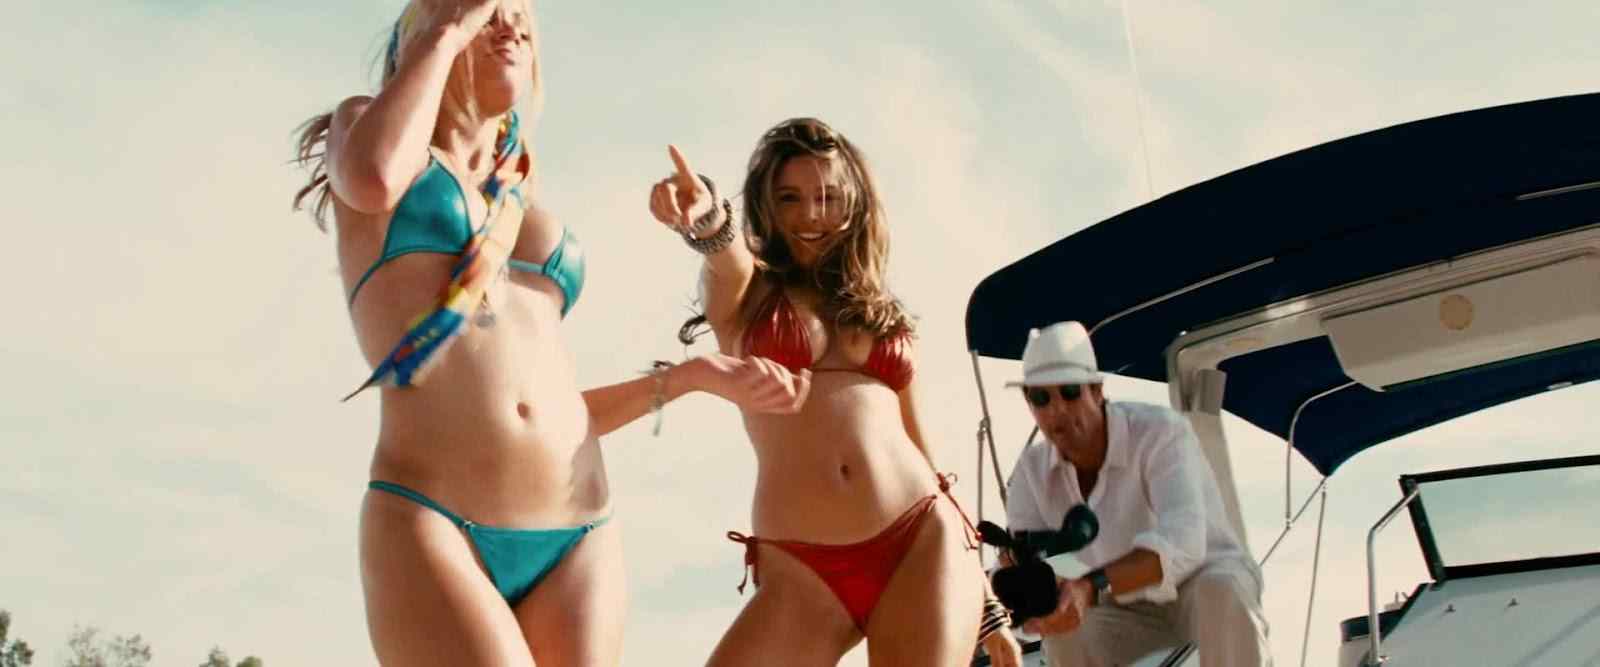 kelly brook from the hit movie Piranha 3d.